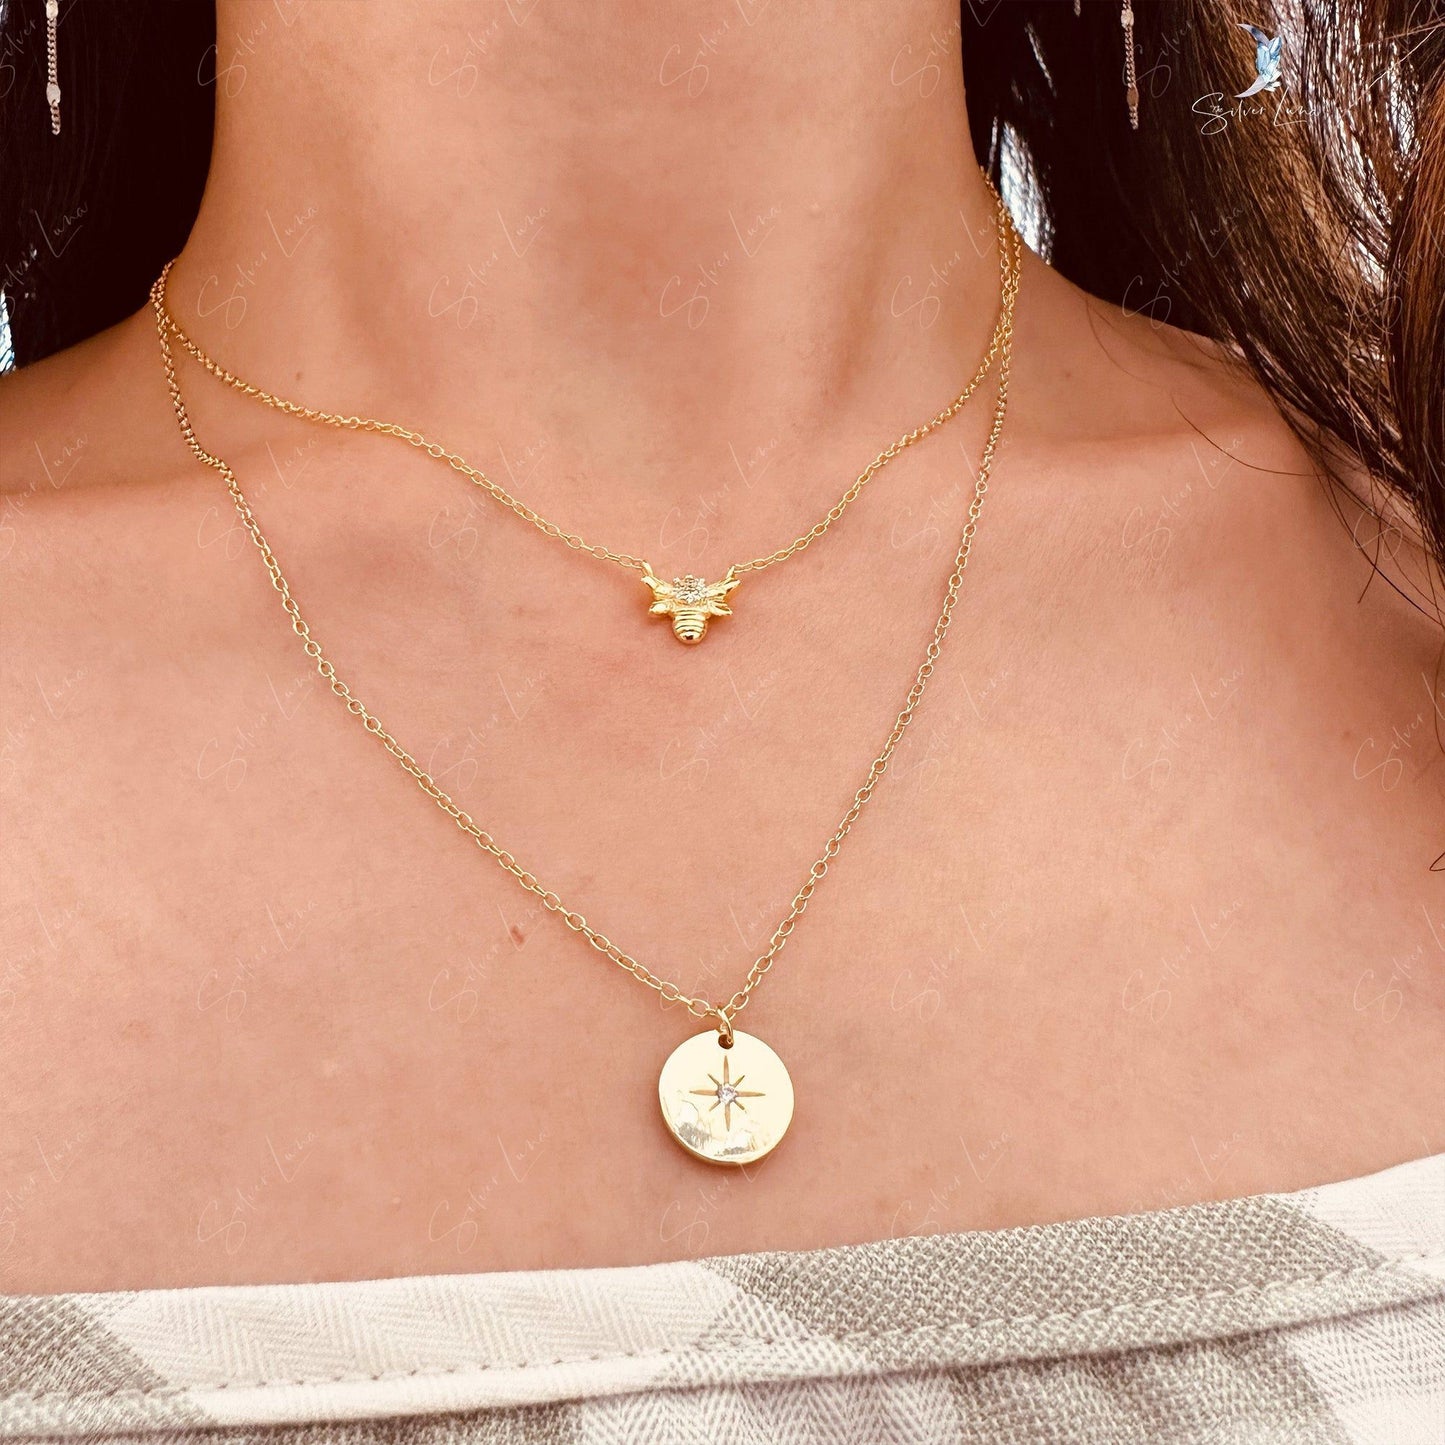 gold Northstar pendant necklace